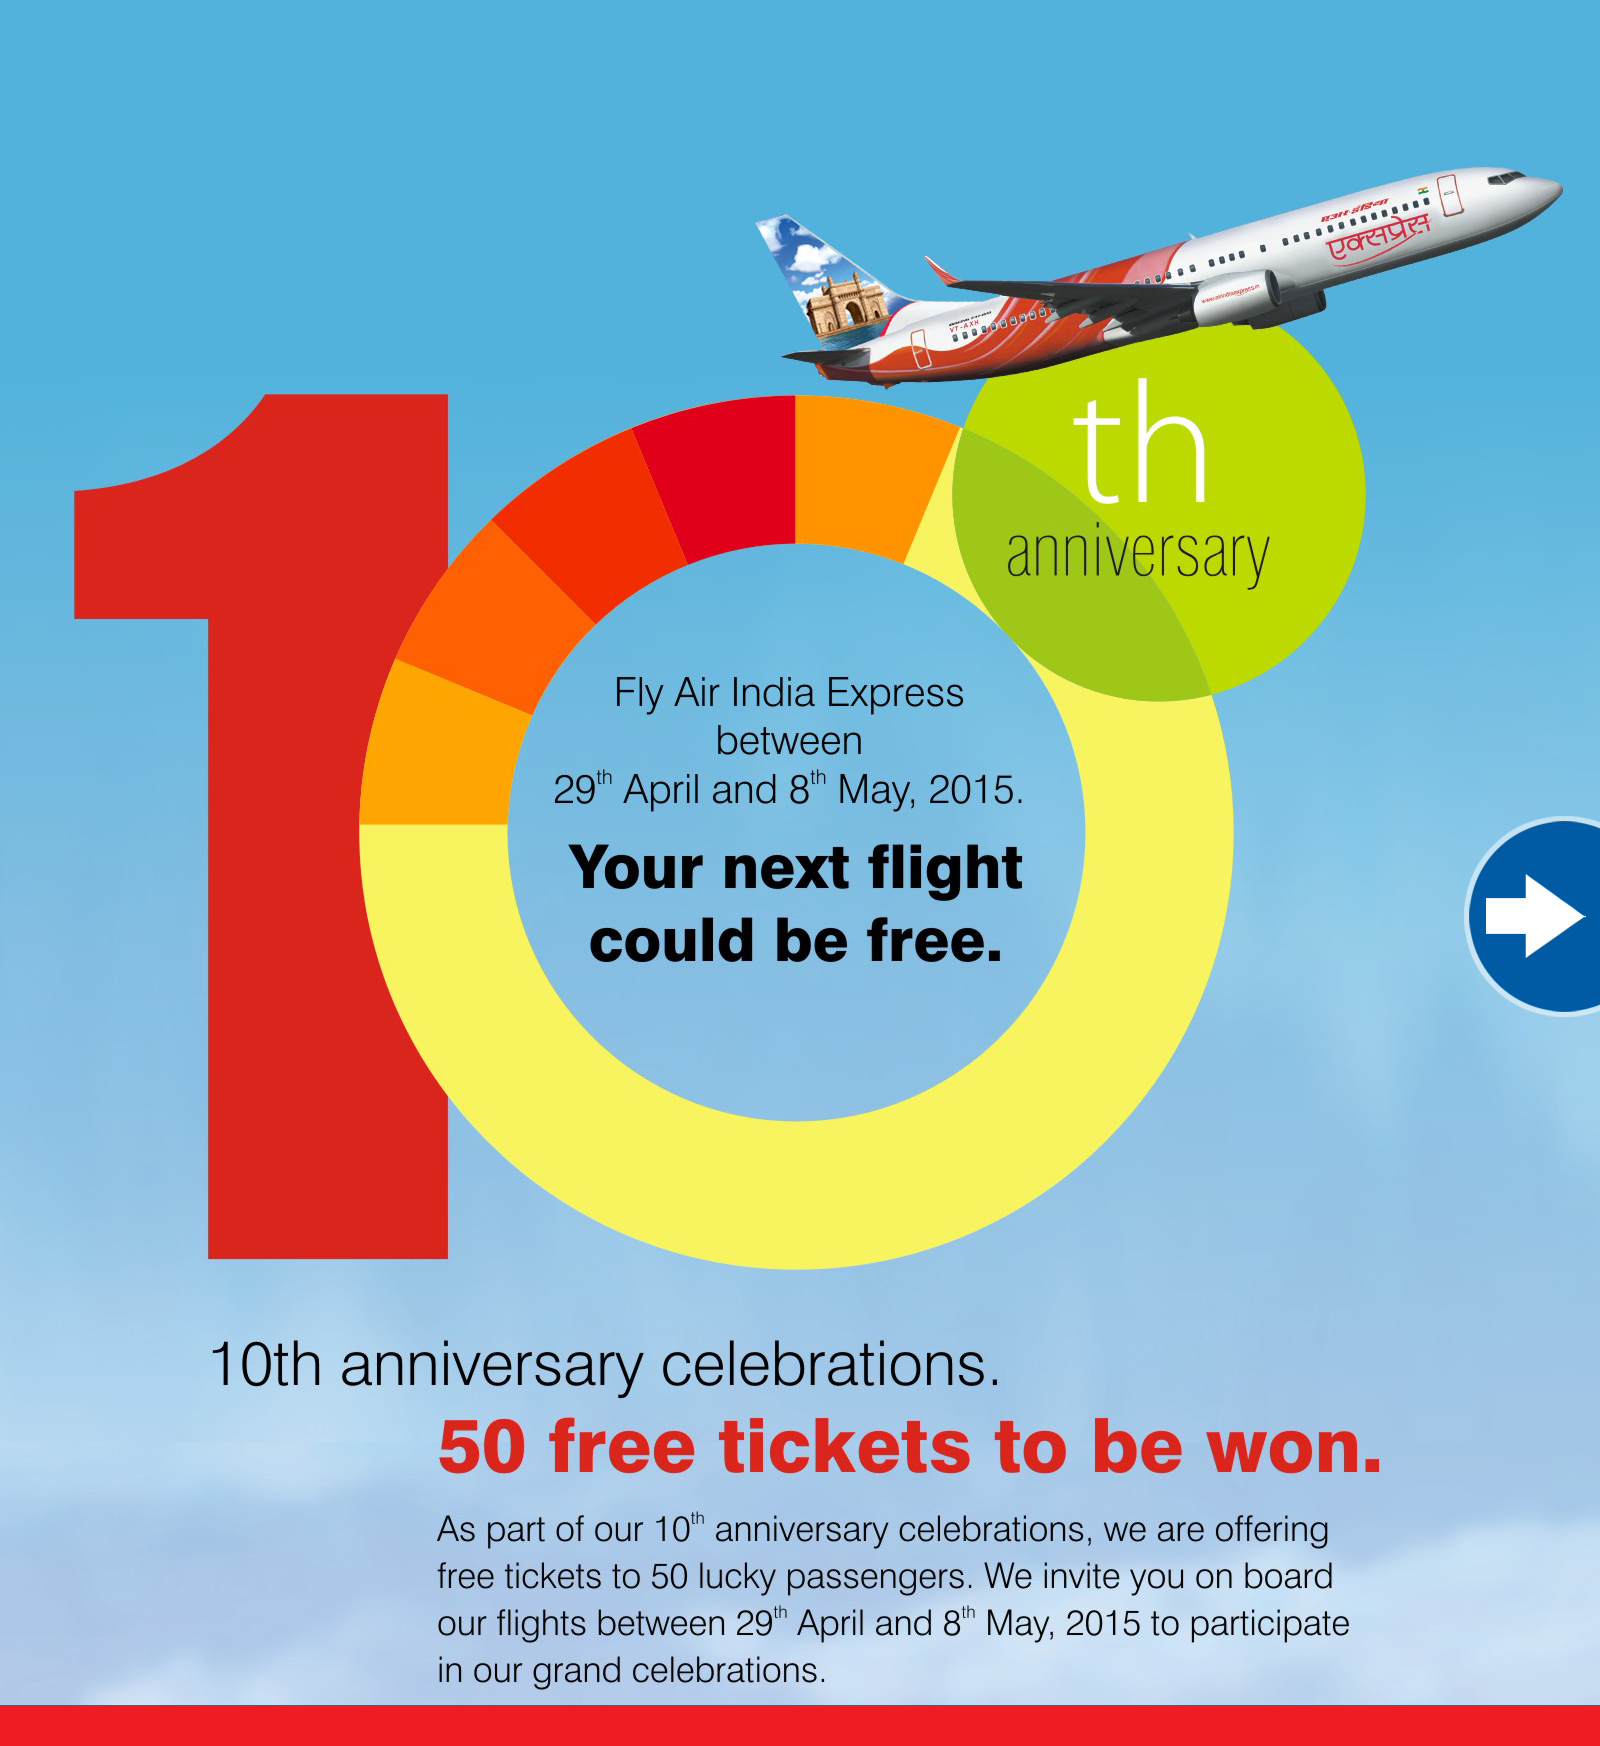 Free Air India Express tickets up for grabs